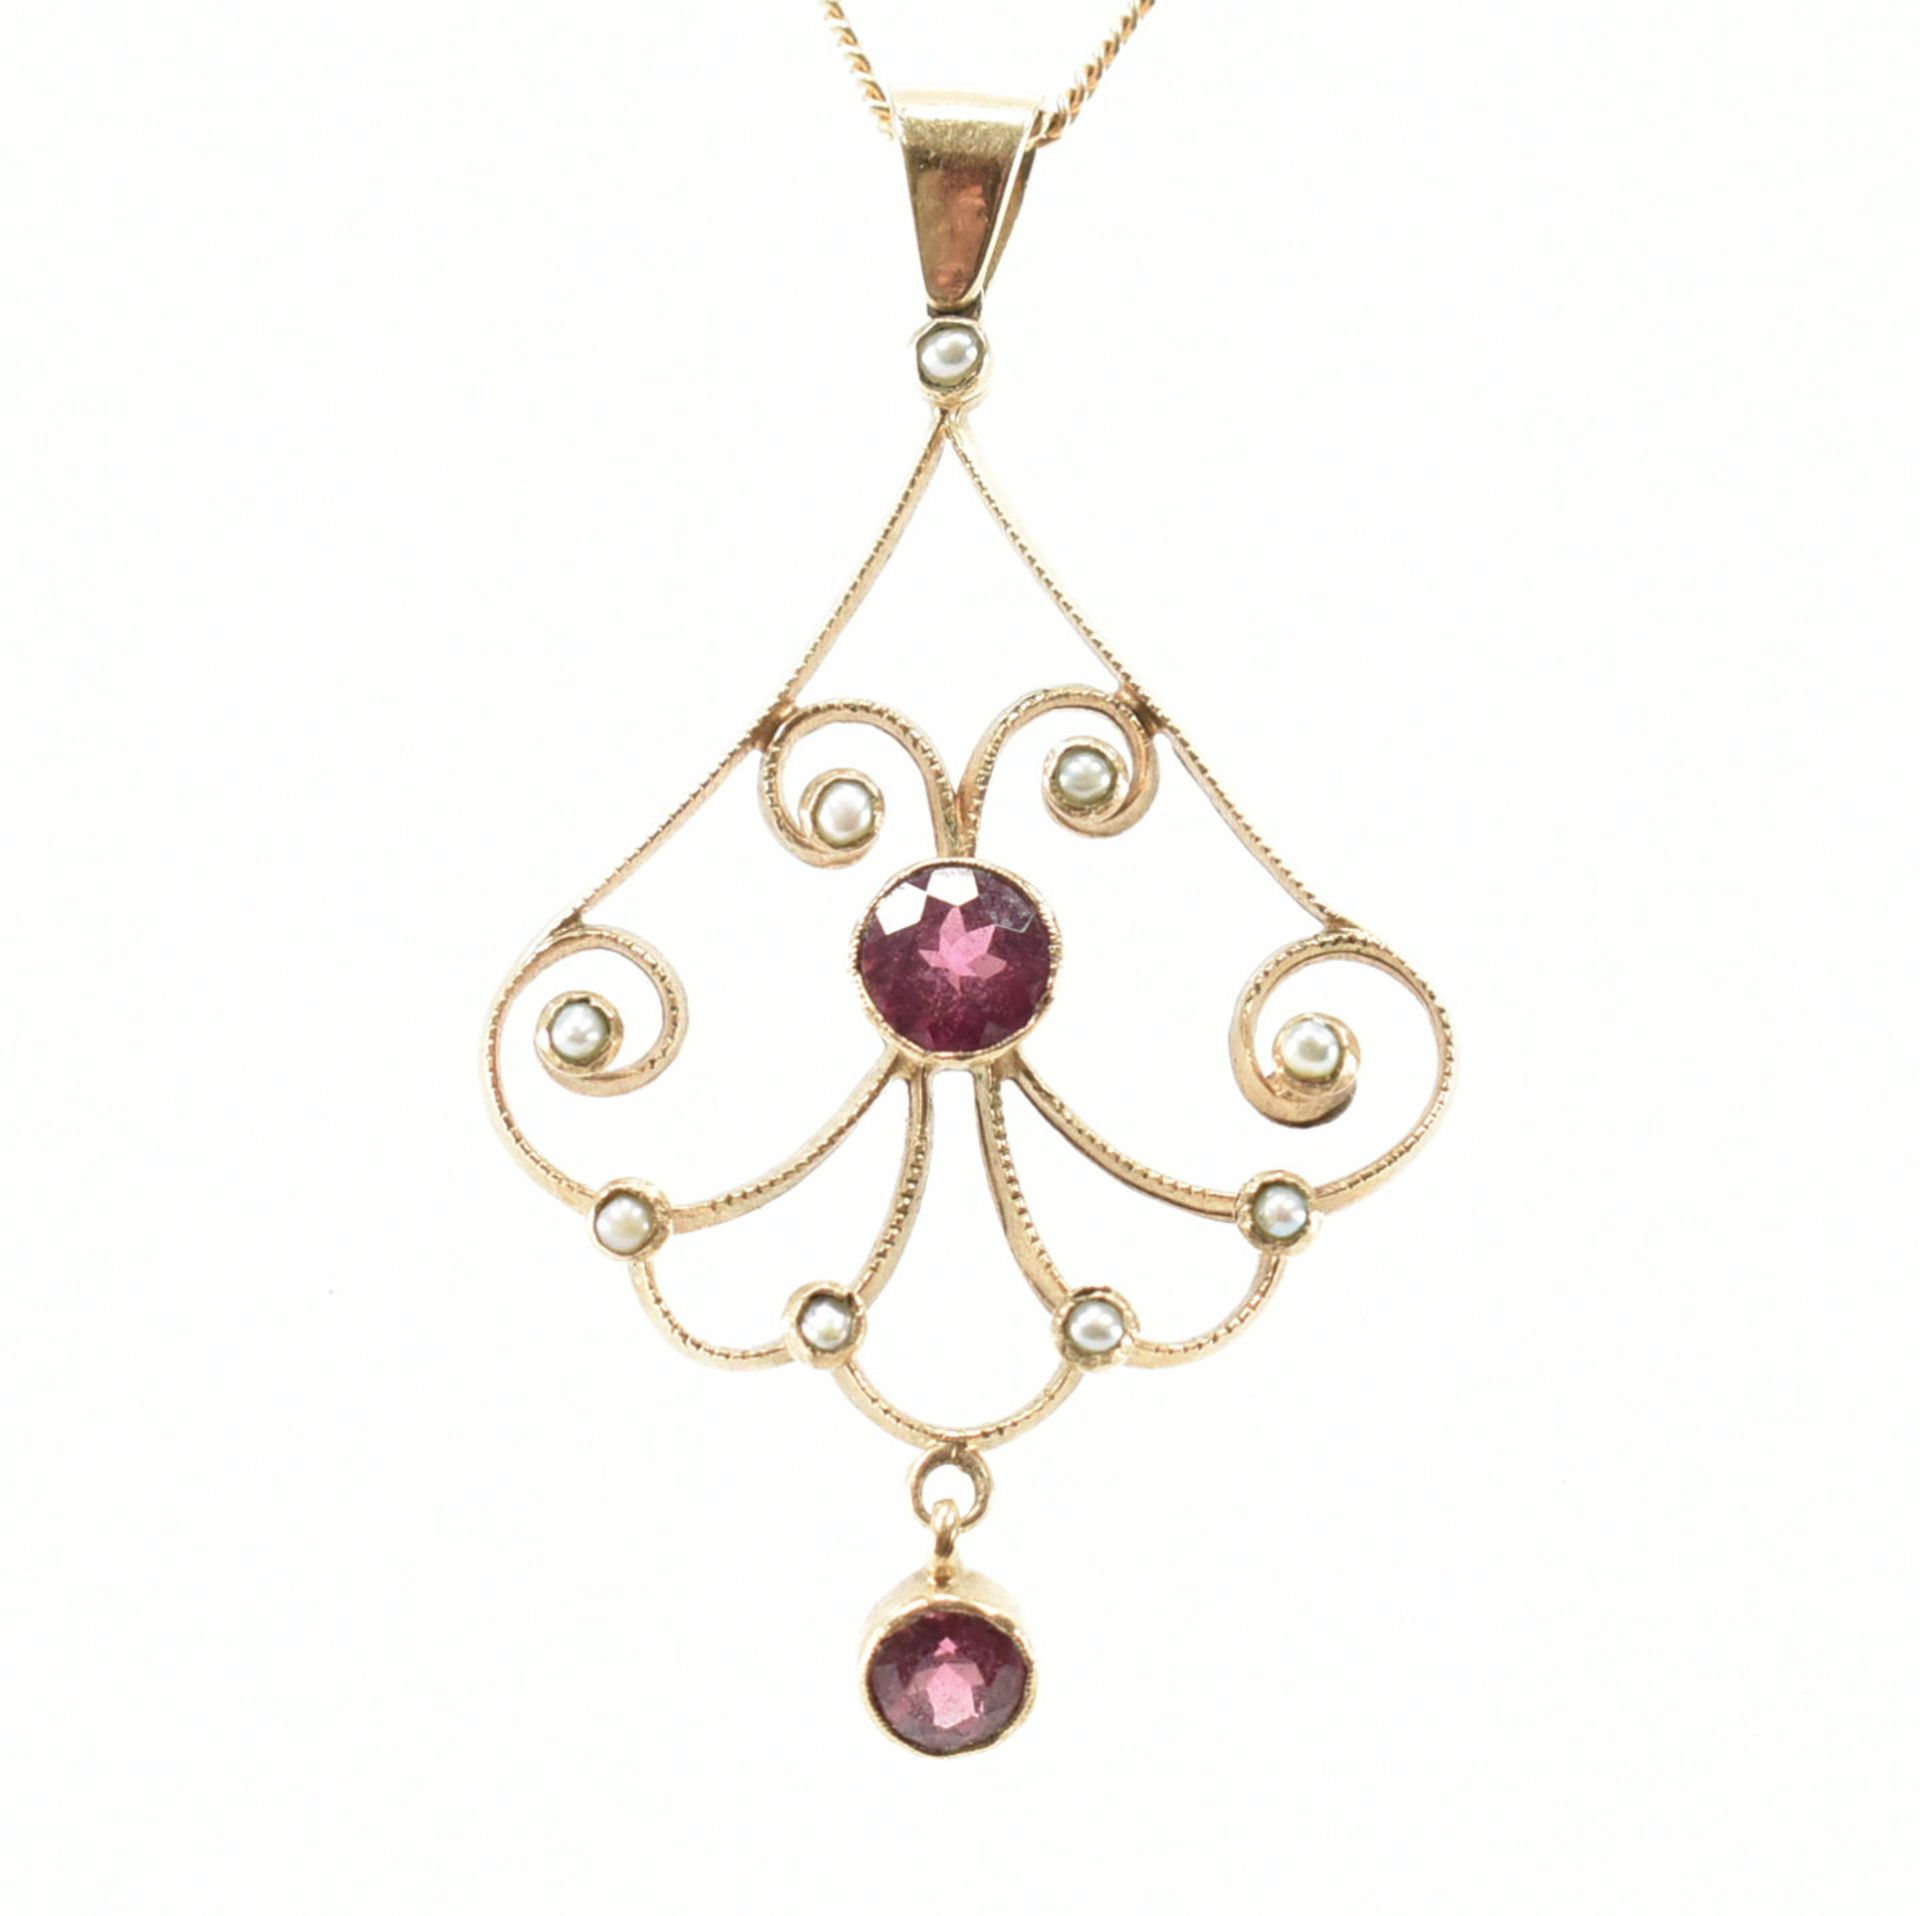 HALLMARKED 9CT GOLD SEED PEARL& GARNET PENDANT NECKLACE